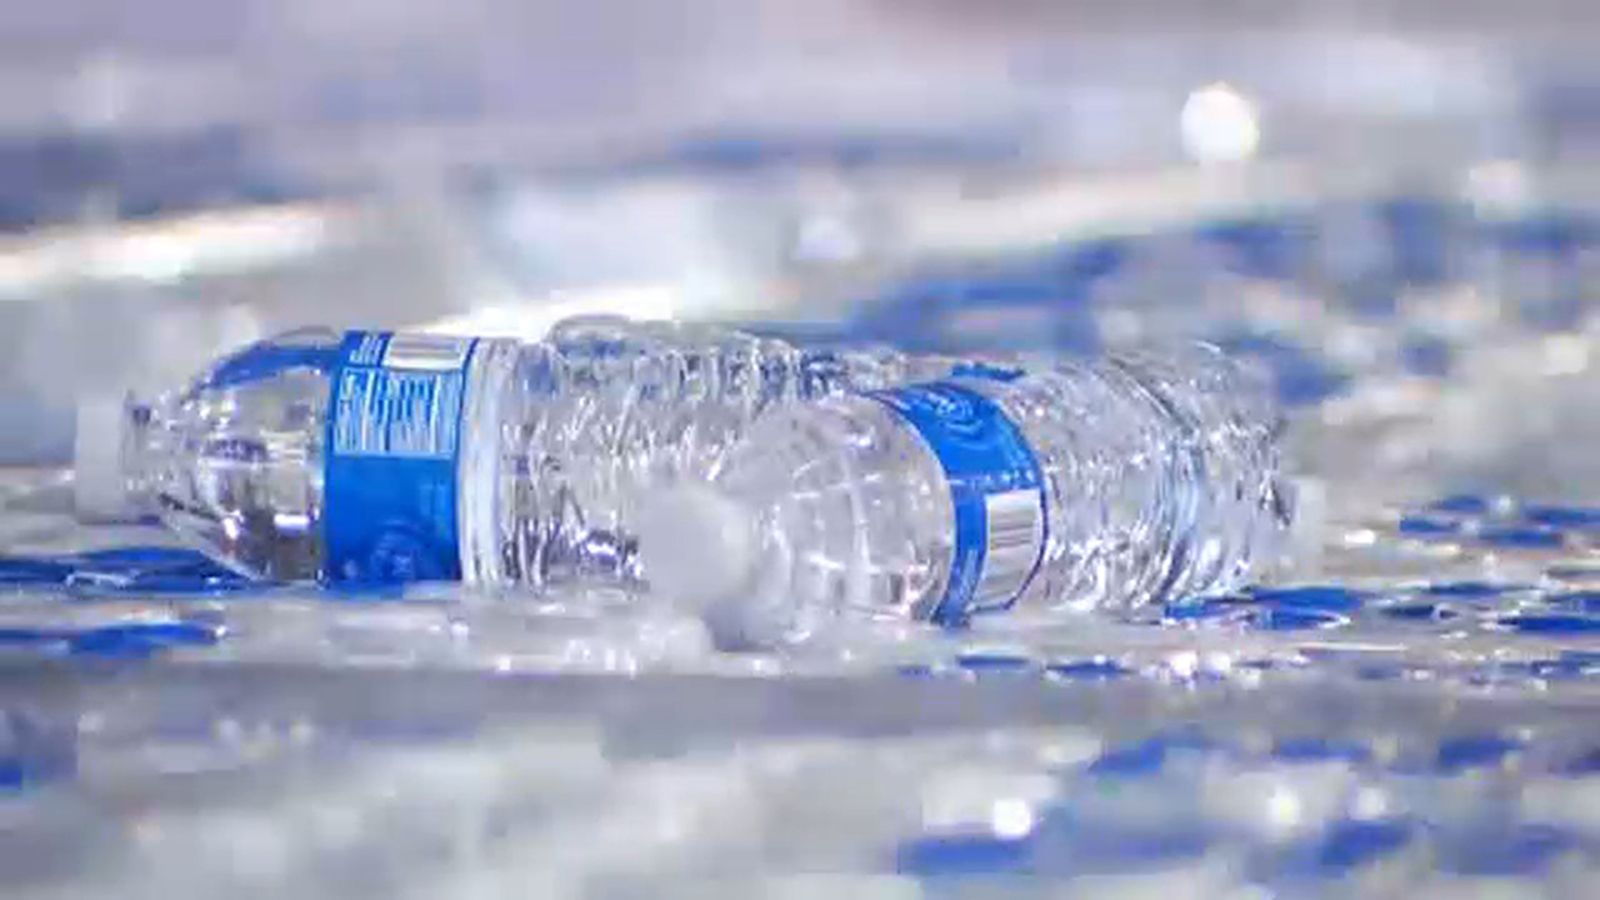 Water bottle ban: Durham becomes 1st county in NC to stop using